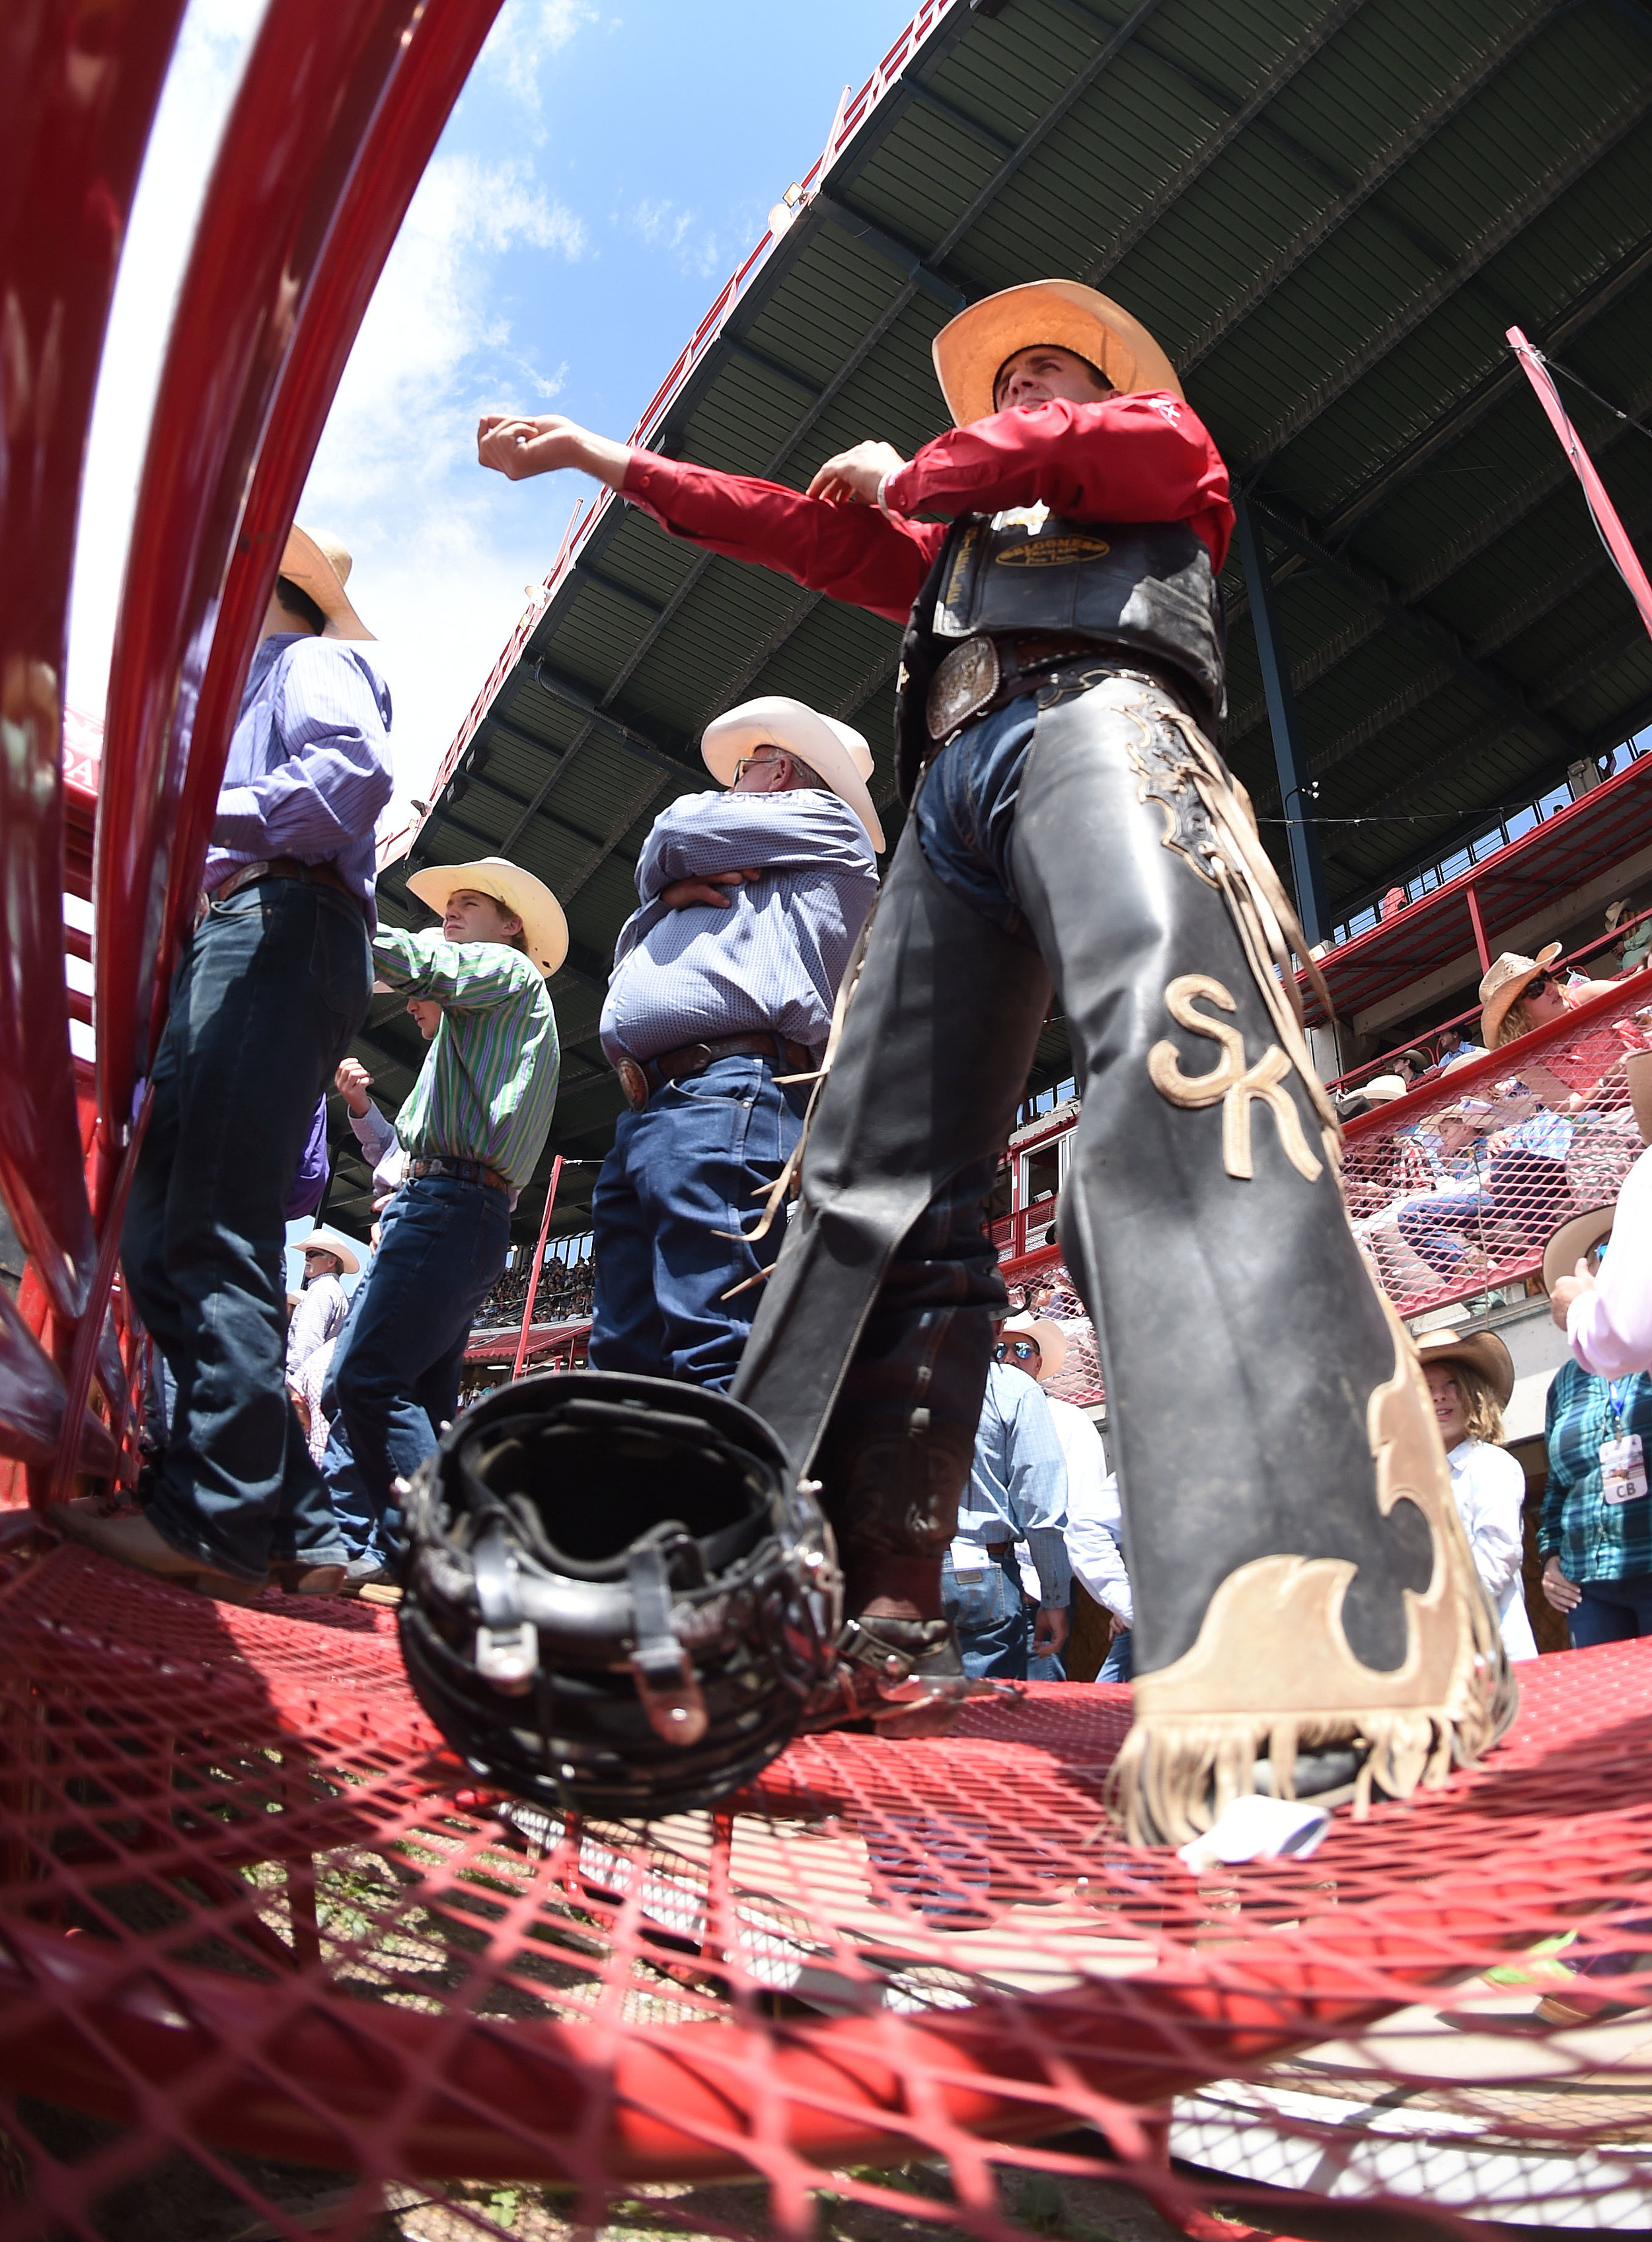  Bull riding champion Sage Kimzey, from Strong City, Oklahoma, prepares for his ride behind the bucking chutes during the 6th performance at the 122nd Cheyenne Frontier Days Rodeo at Frontier Park in Cheyenne, Wyoming Wednesday, July 25, 2018.  